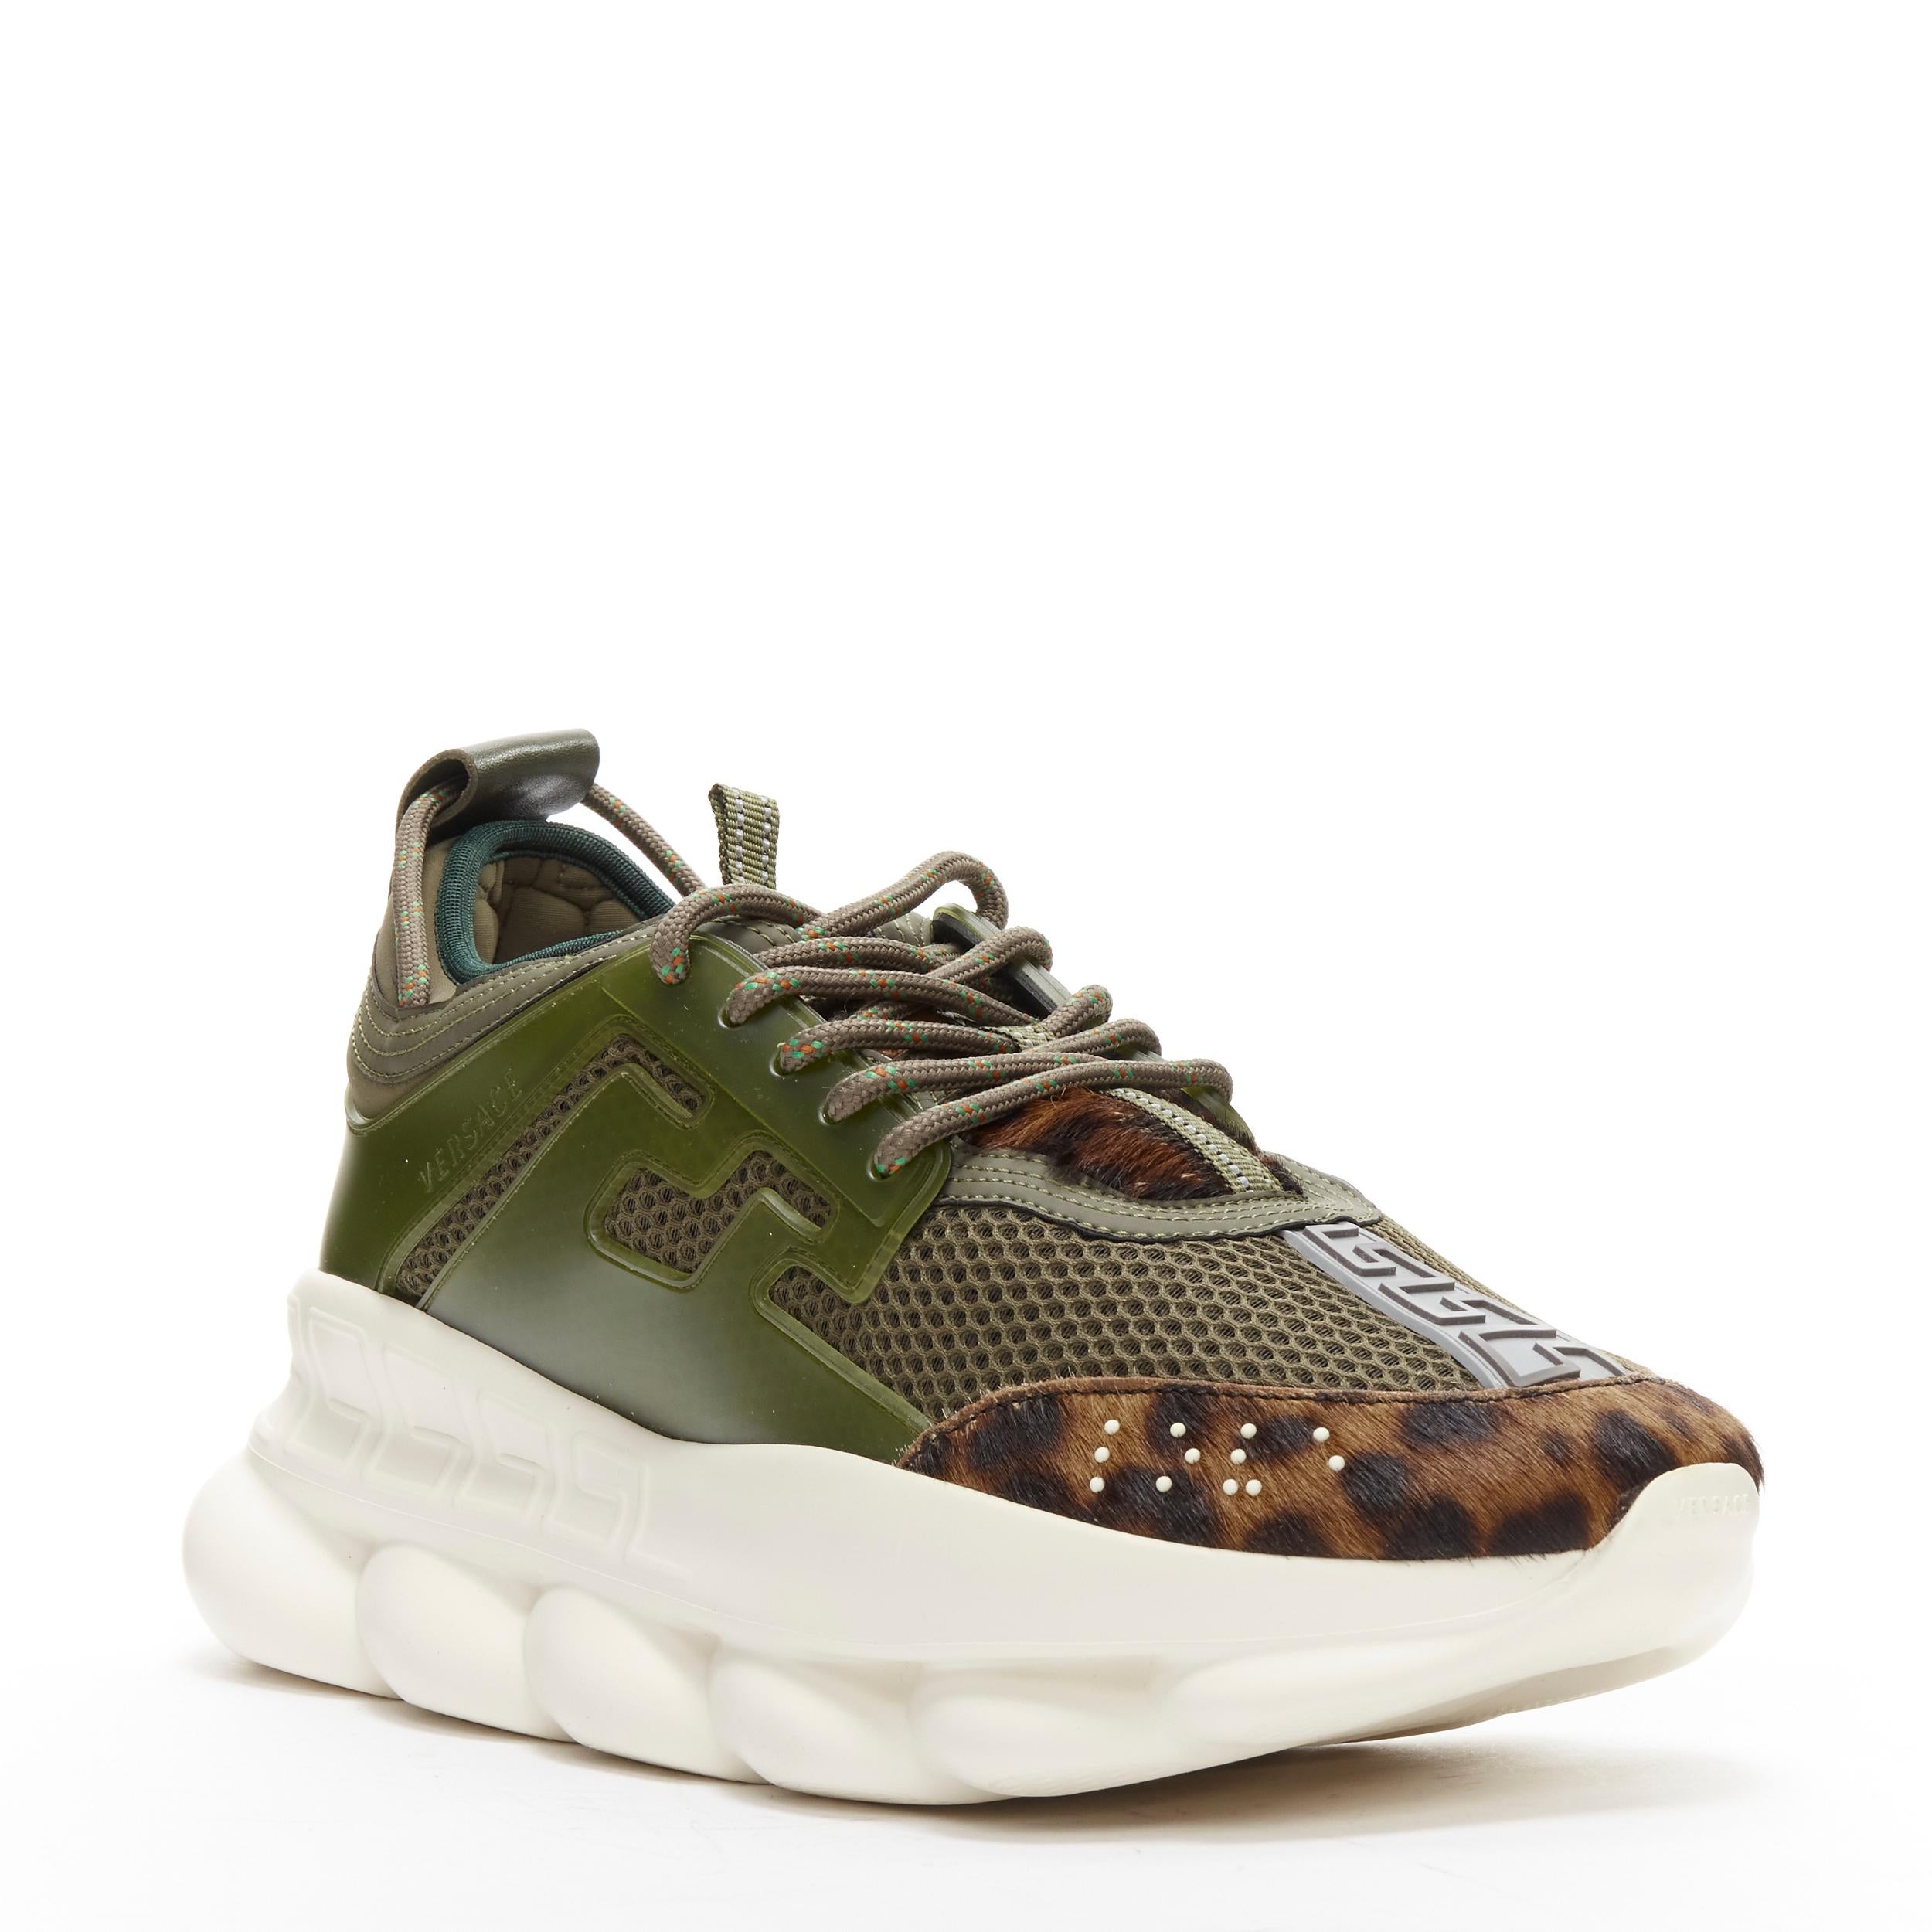 new VERSACE Chain Reaction Wild Leopard green suede low chunky sneaker EU43
Reference: TGAS/B01124
Brand: Versace
Designer: Donatella Versace
Model: Versace Chain Reaction
Material: Fabric, Leather
Color: Green
Pattern: Solid
Closure: Lace